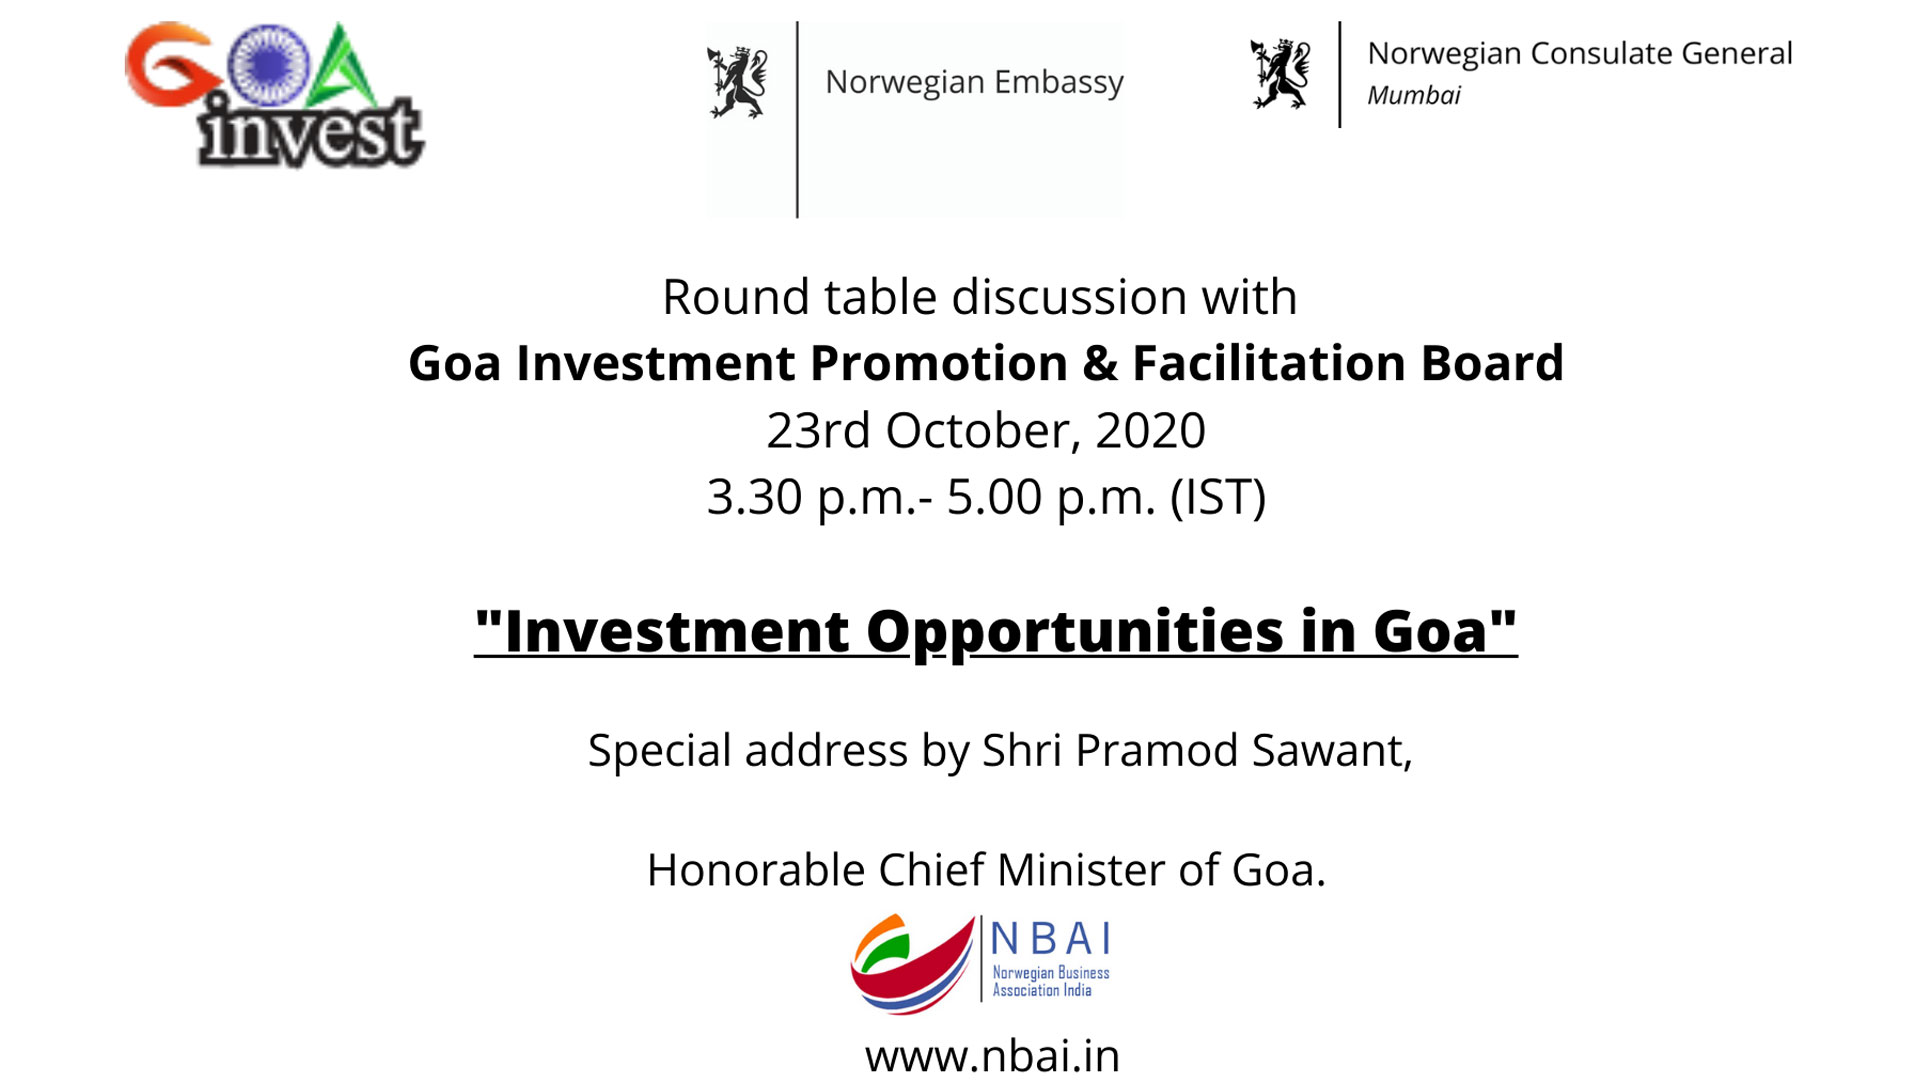 INVESTMENT OPPORTUNITIES IN GOA